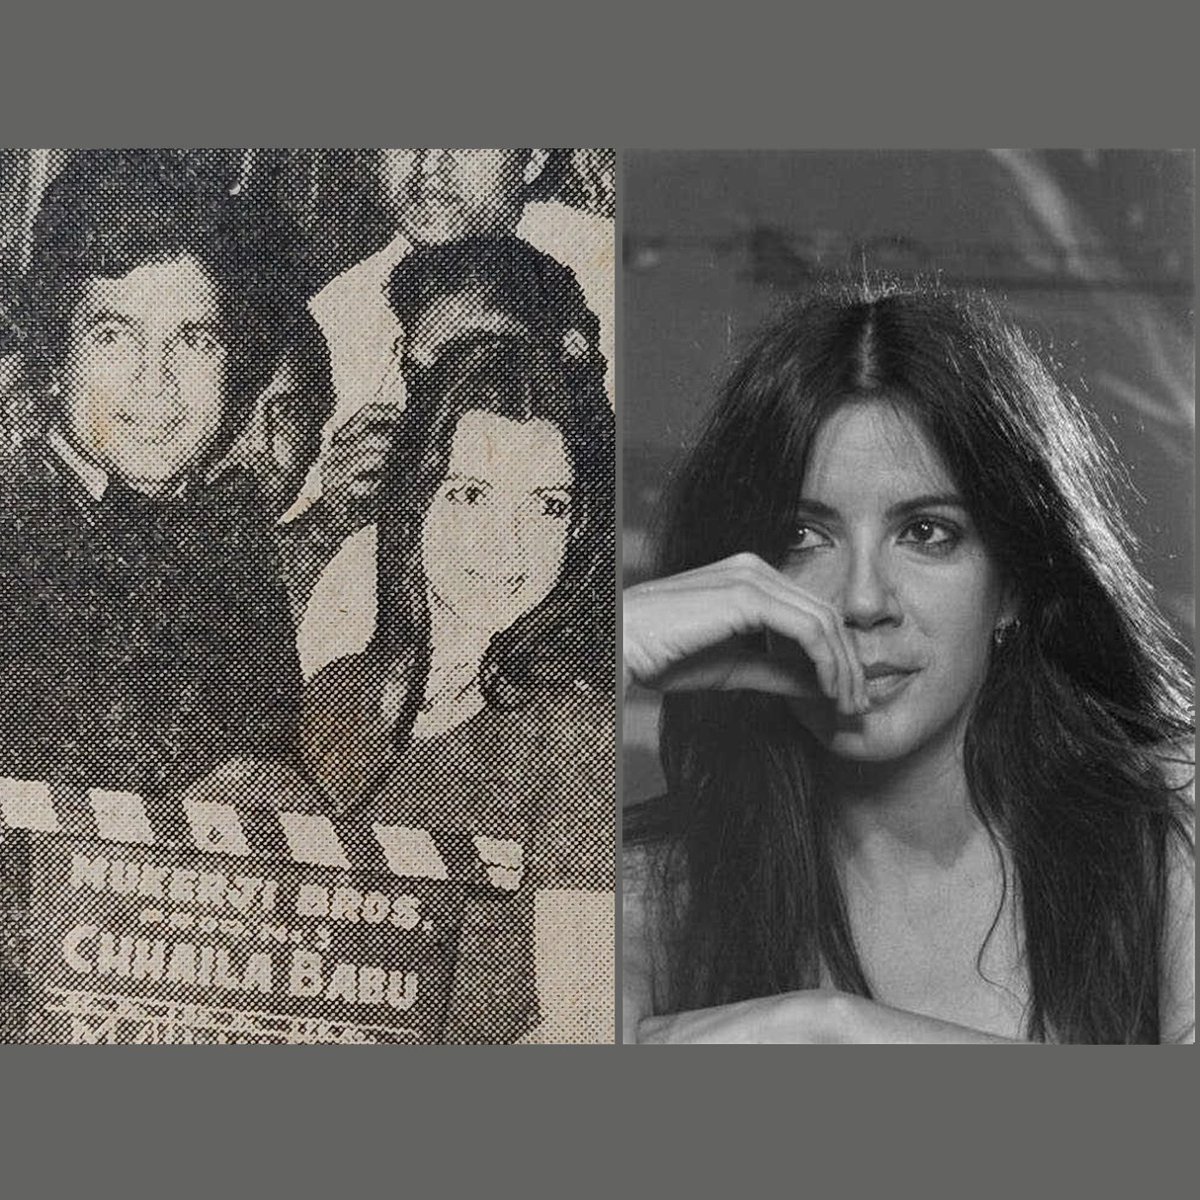 Blast from the past! Canadian actress Carole Laure gave the clap for Chhaila Babu on 10th January 1974, seen here in the company of Rajesh Khanna @mrsfunnybones #rajeshkhanna #carolelaure #seventies #smmausaja #bollywoood #hindifilms #hindicinema #indianfilms #indiancinema